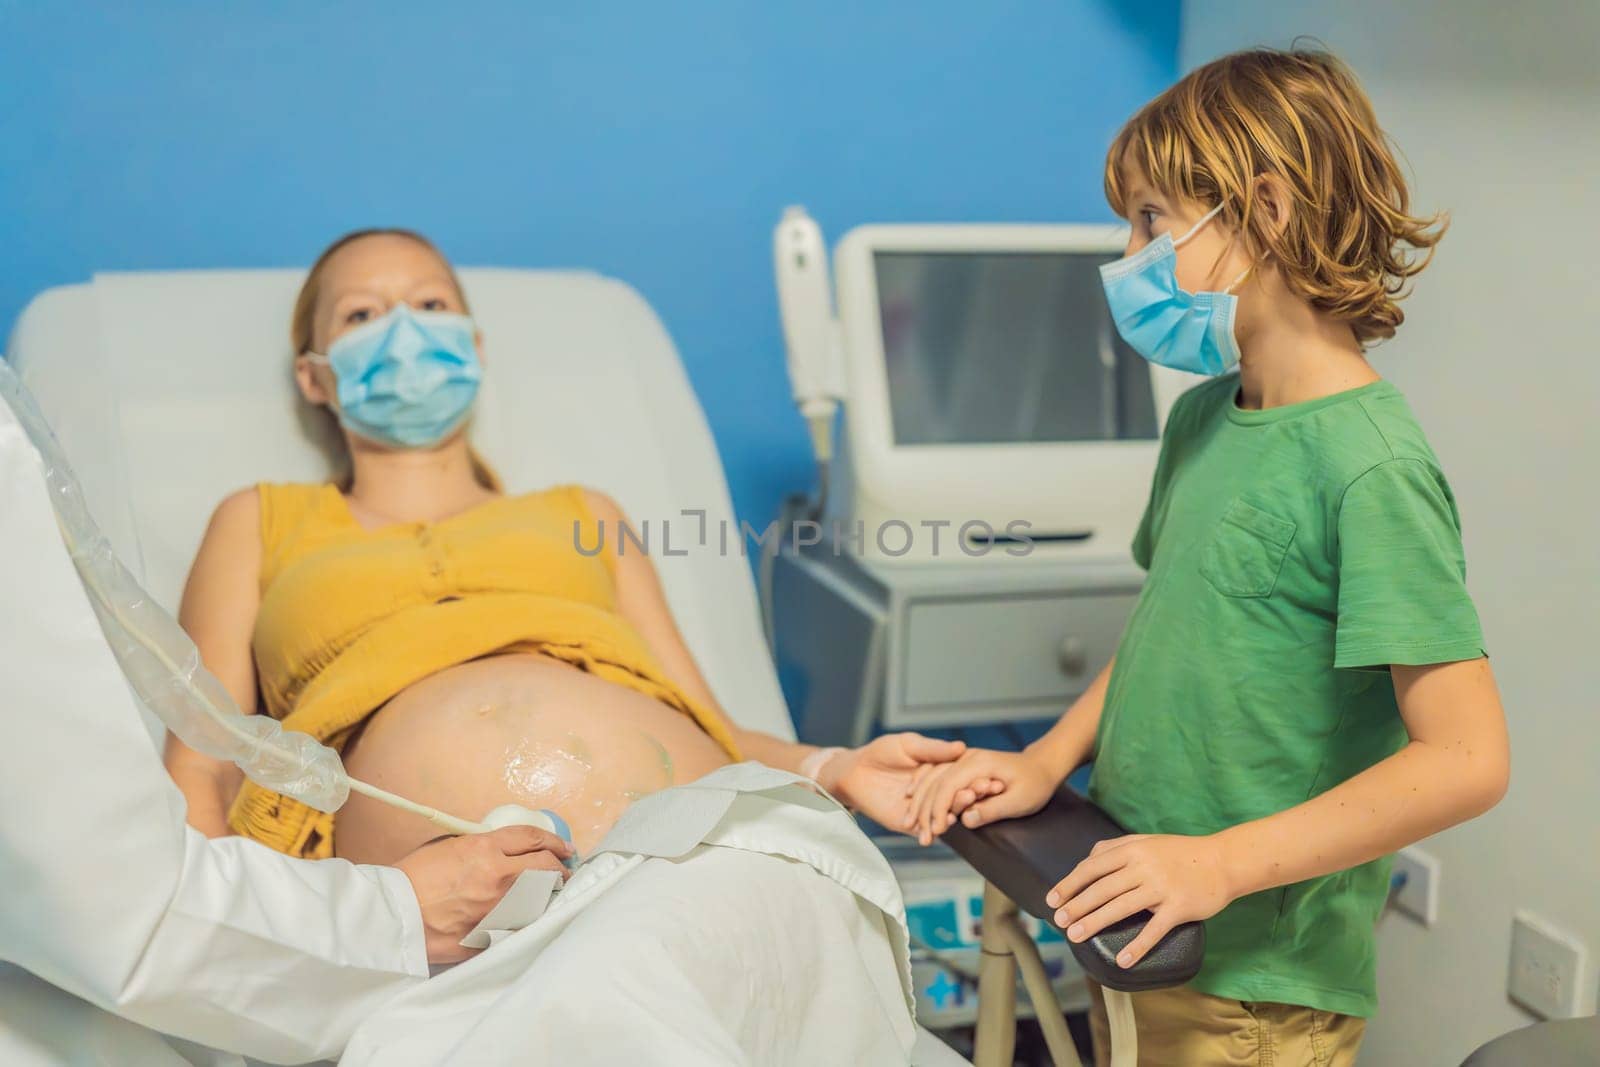 a pregnant mother's ultrasound visit, sharing the excitement with her son who eagerly awaits the arrival of his baby brother. A heartwarming portrayal of family bonds and the anticipation of new beginnings by galitskaya